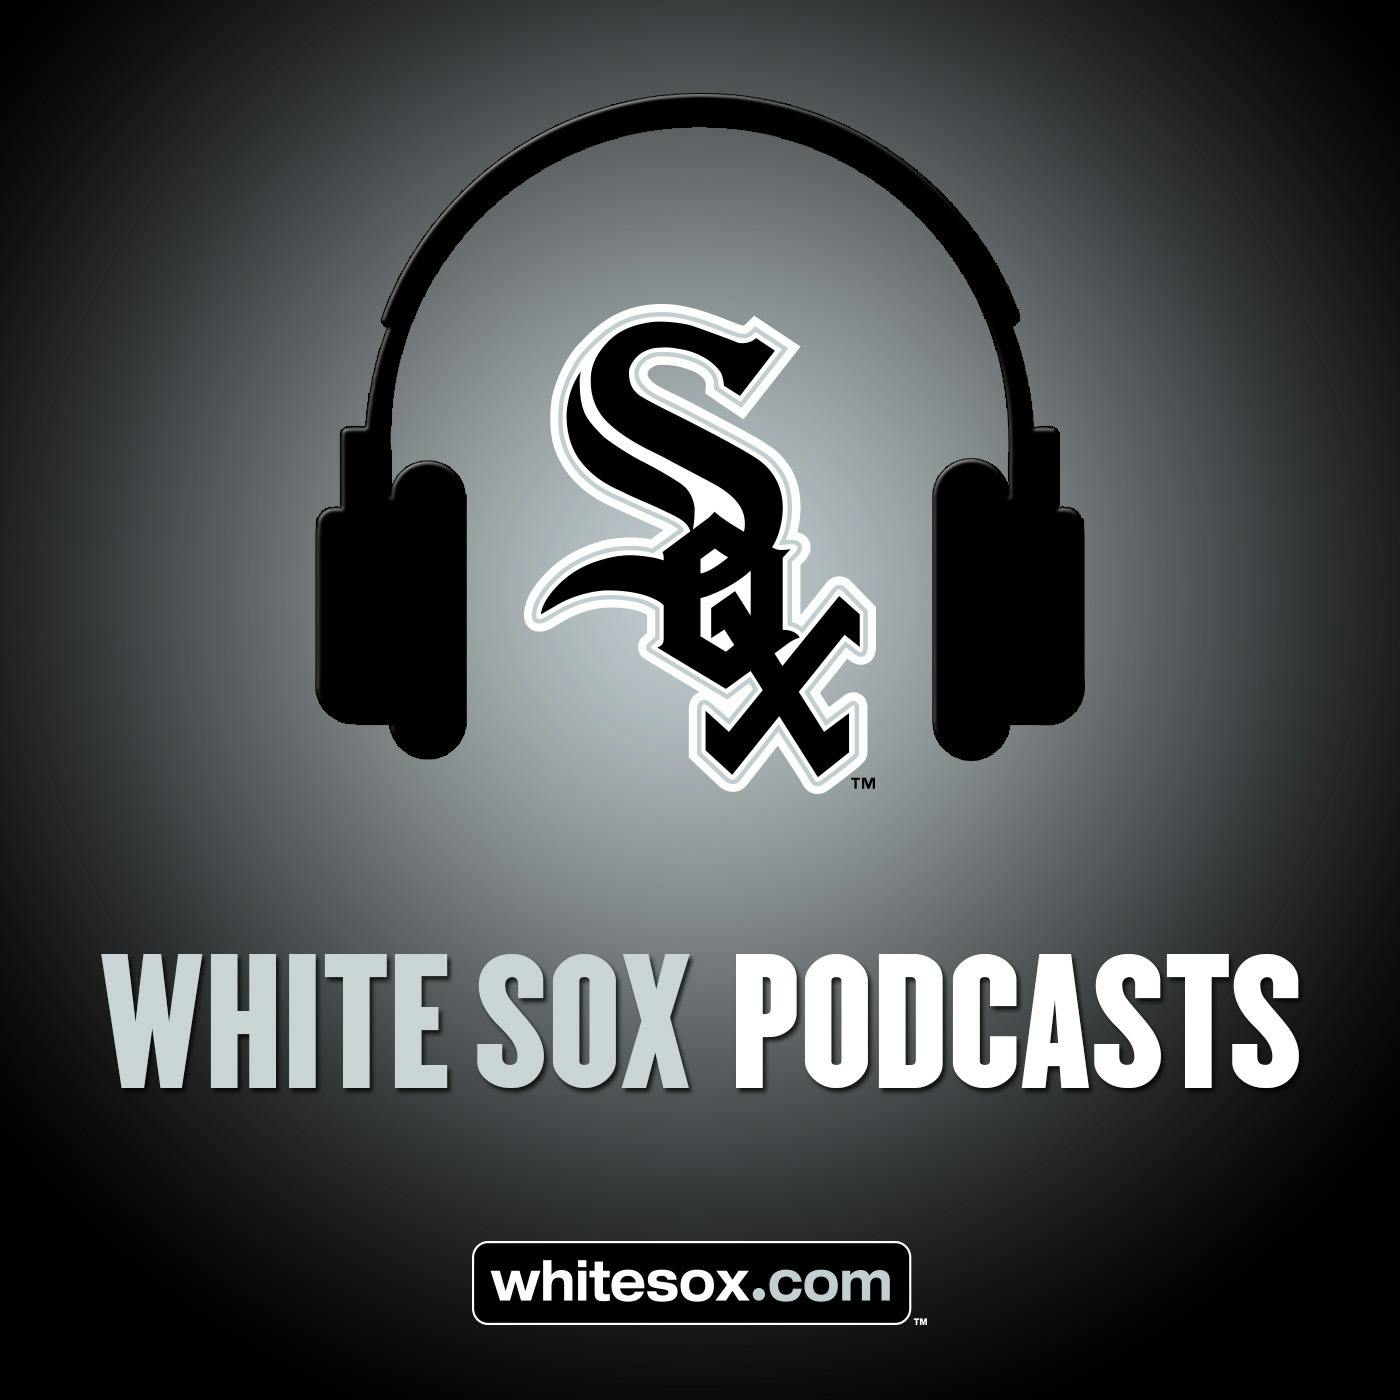 1/19/20: White Sox Weekly